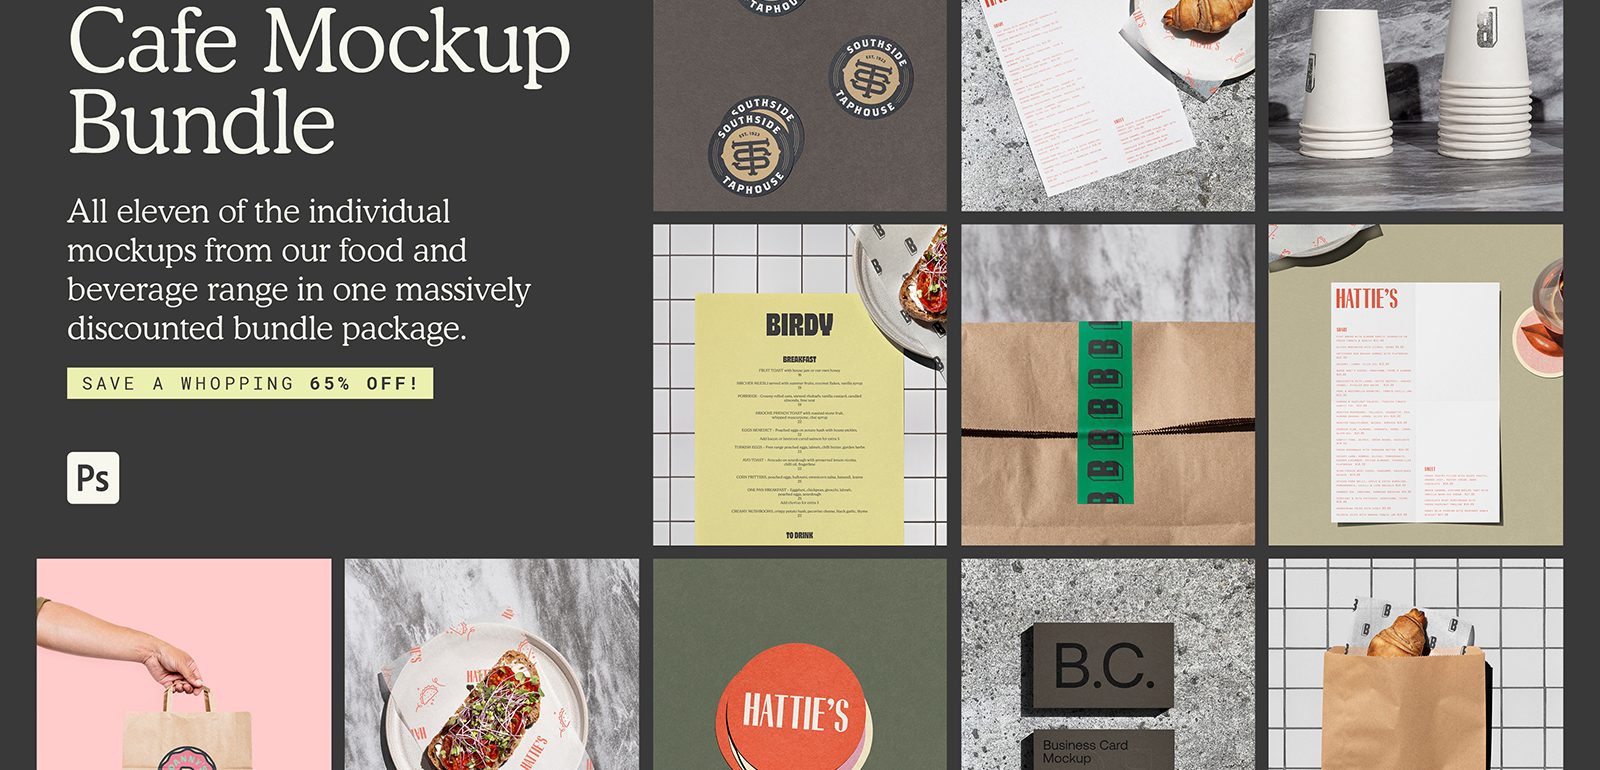 Cafe Mockup Bundle featuring food and beverage items, paper bags, menus, and business cards for restaurant branding, 65% off, design assets.